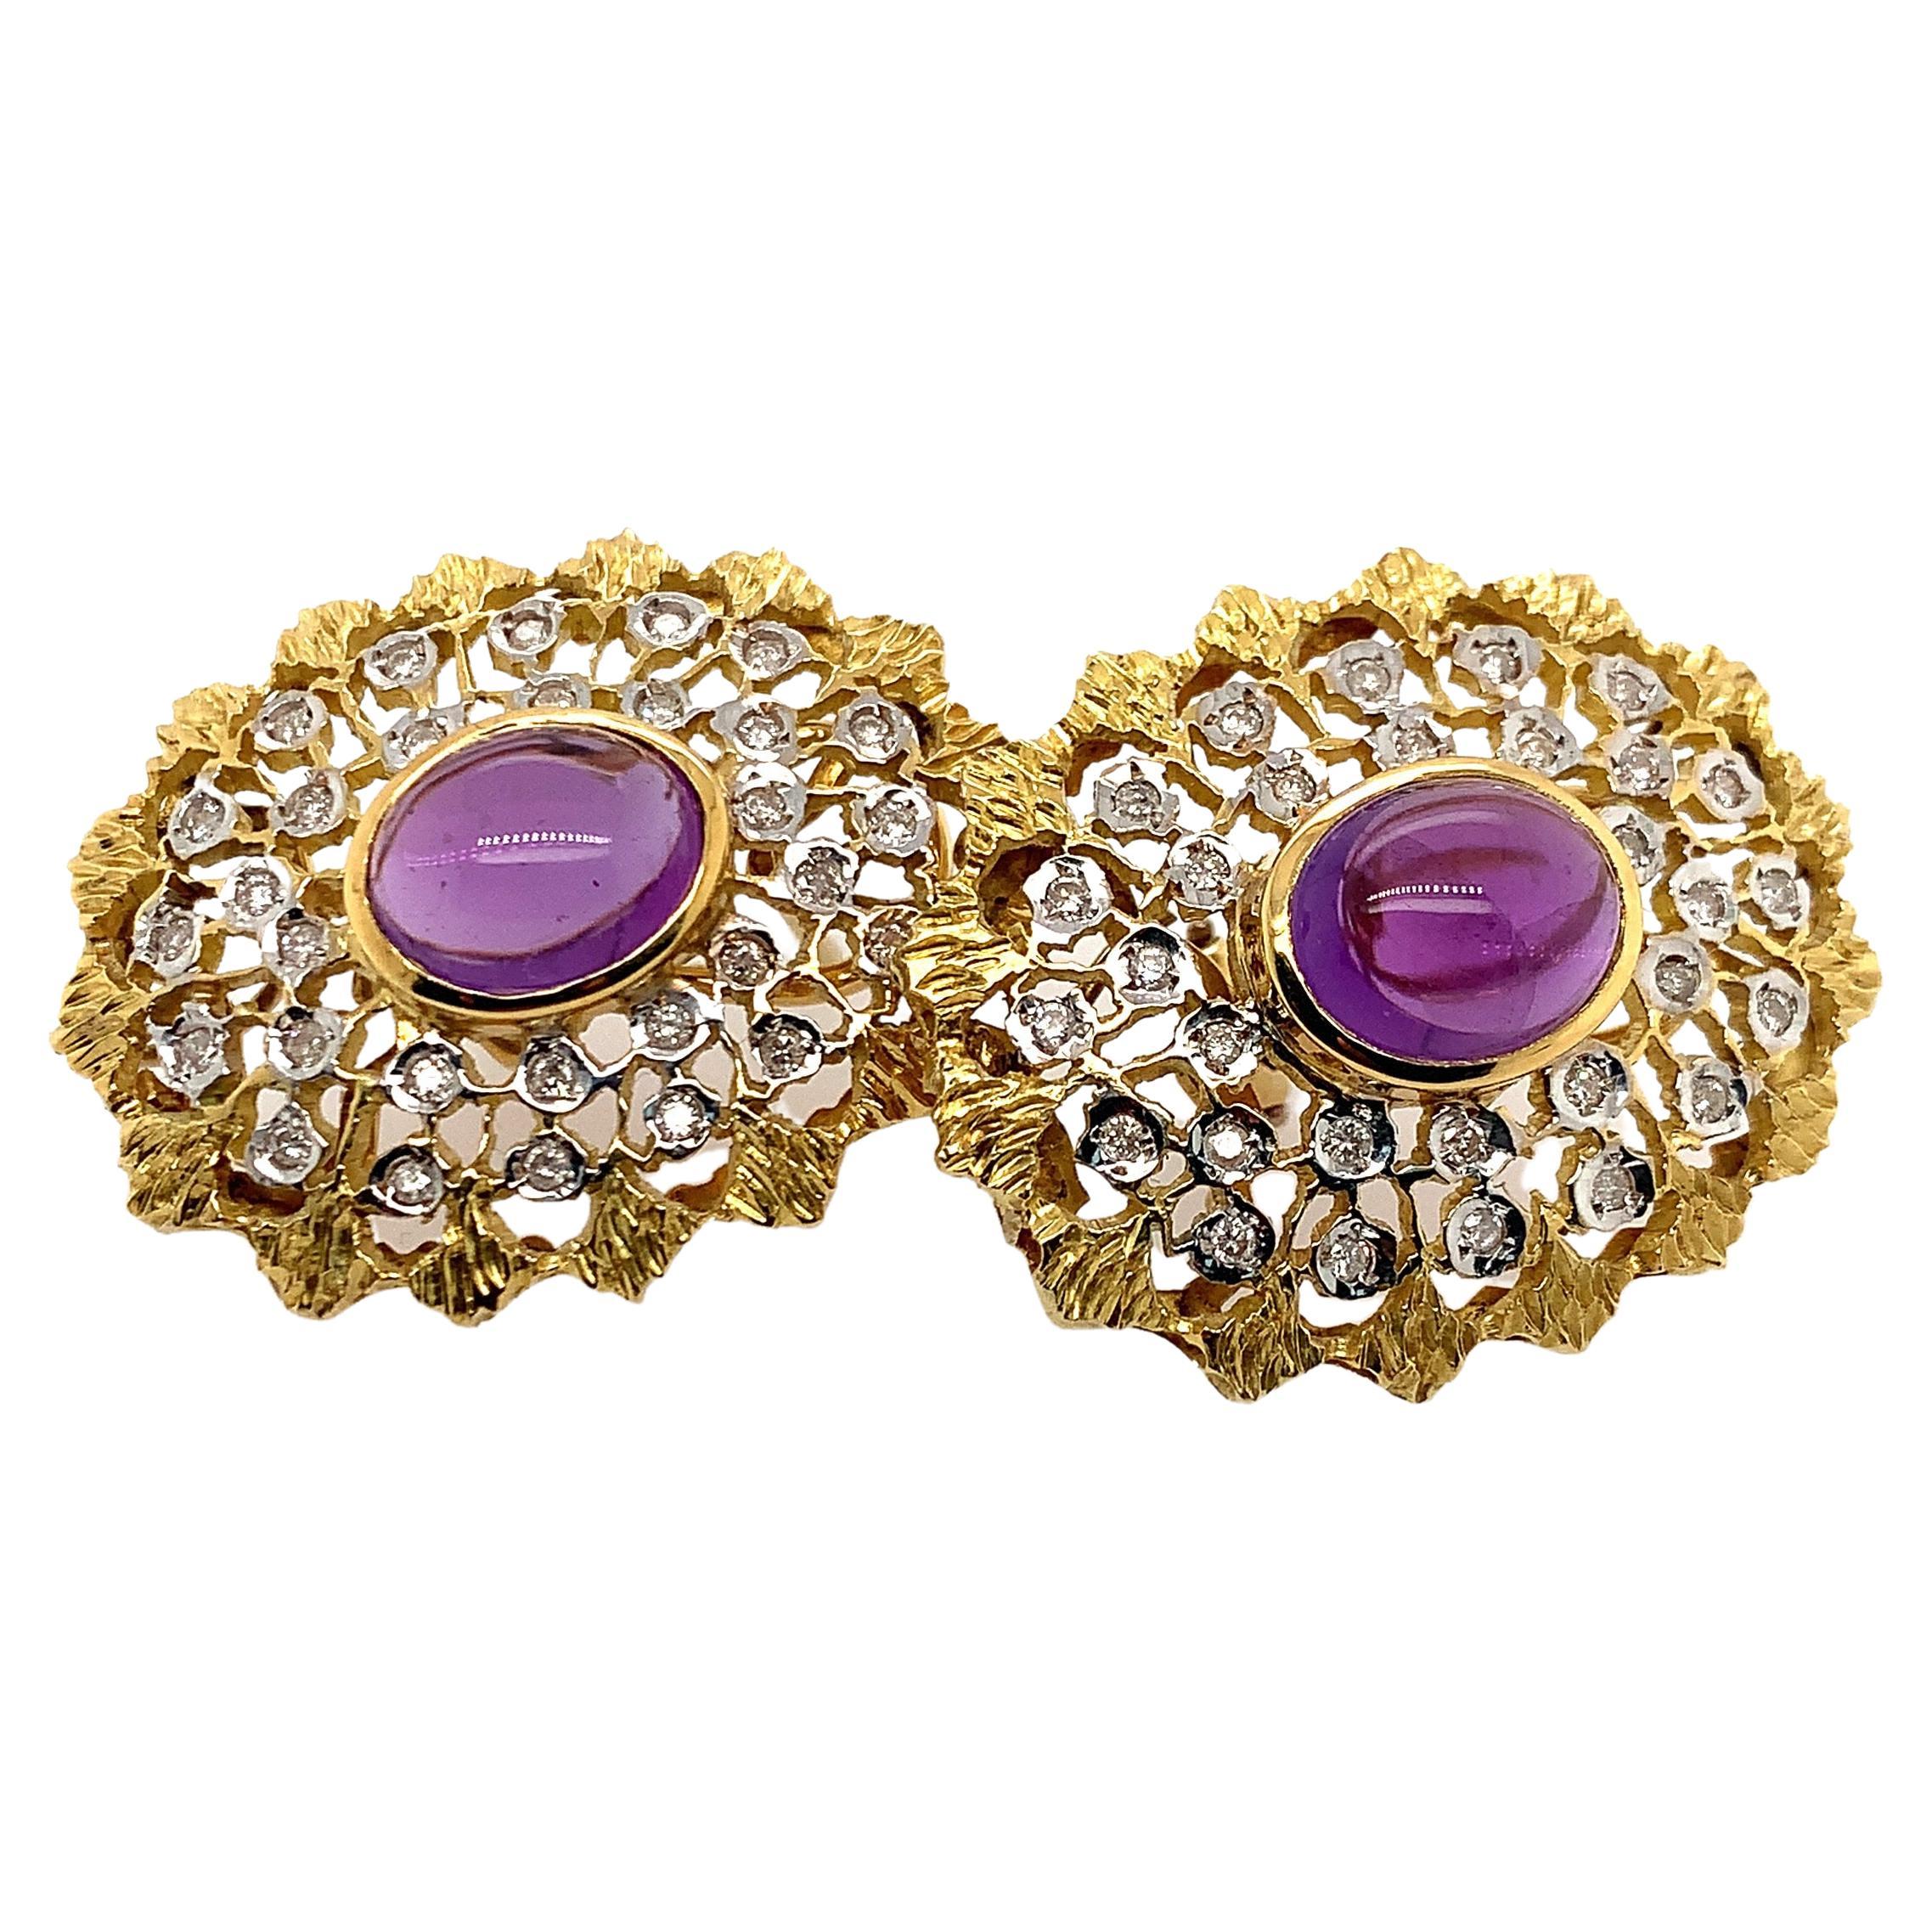 Pair of Amethyst, Diamond and Two-Tone Gold Ear Clips